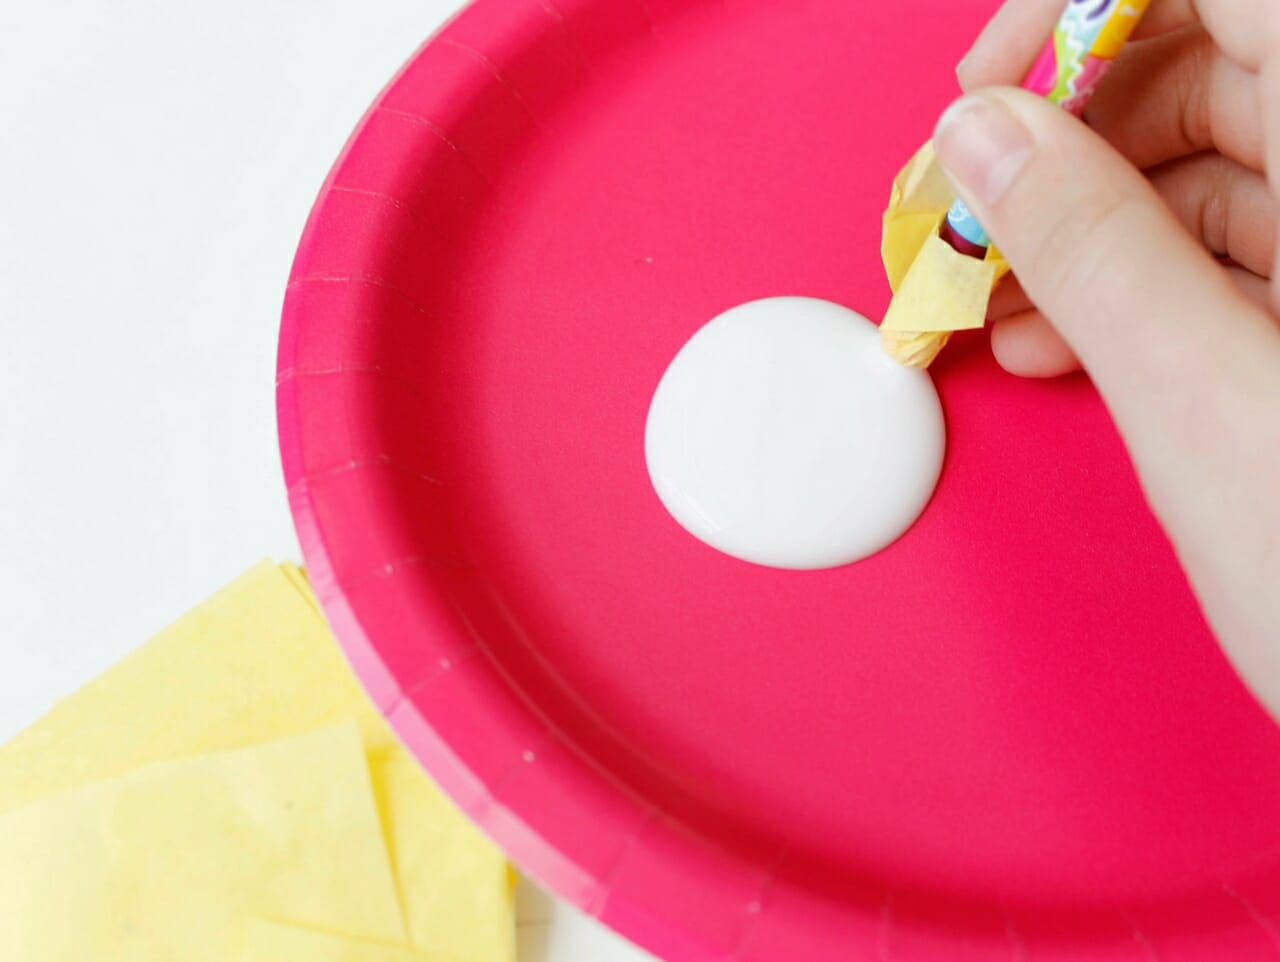 Pink paper plate with some white school glue on it. Yellow tissue paper squares on the side. Hand holding a pencil with tissue paper on it dipping tip into the glue.